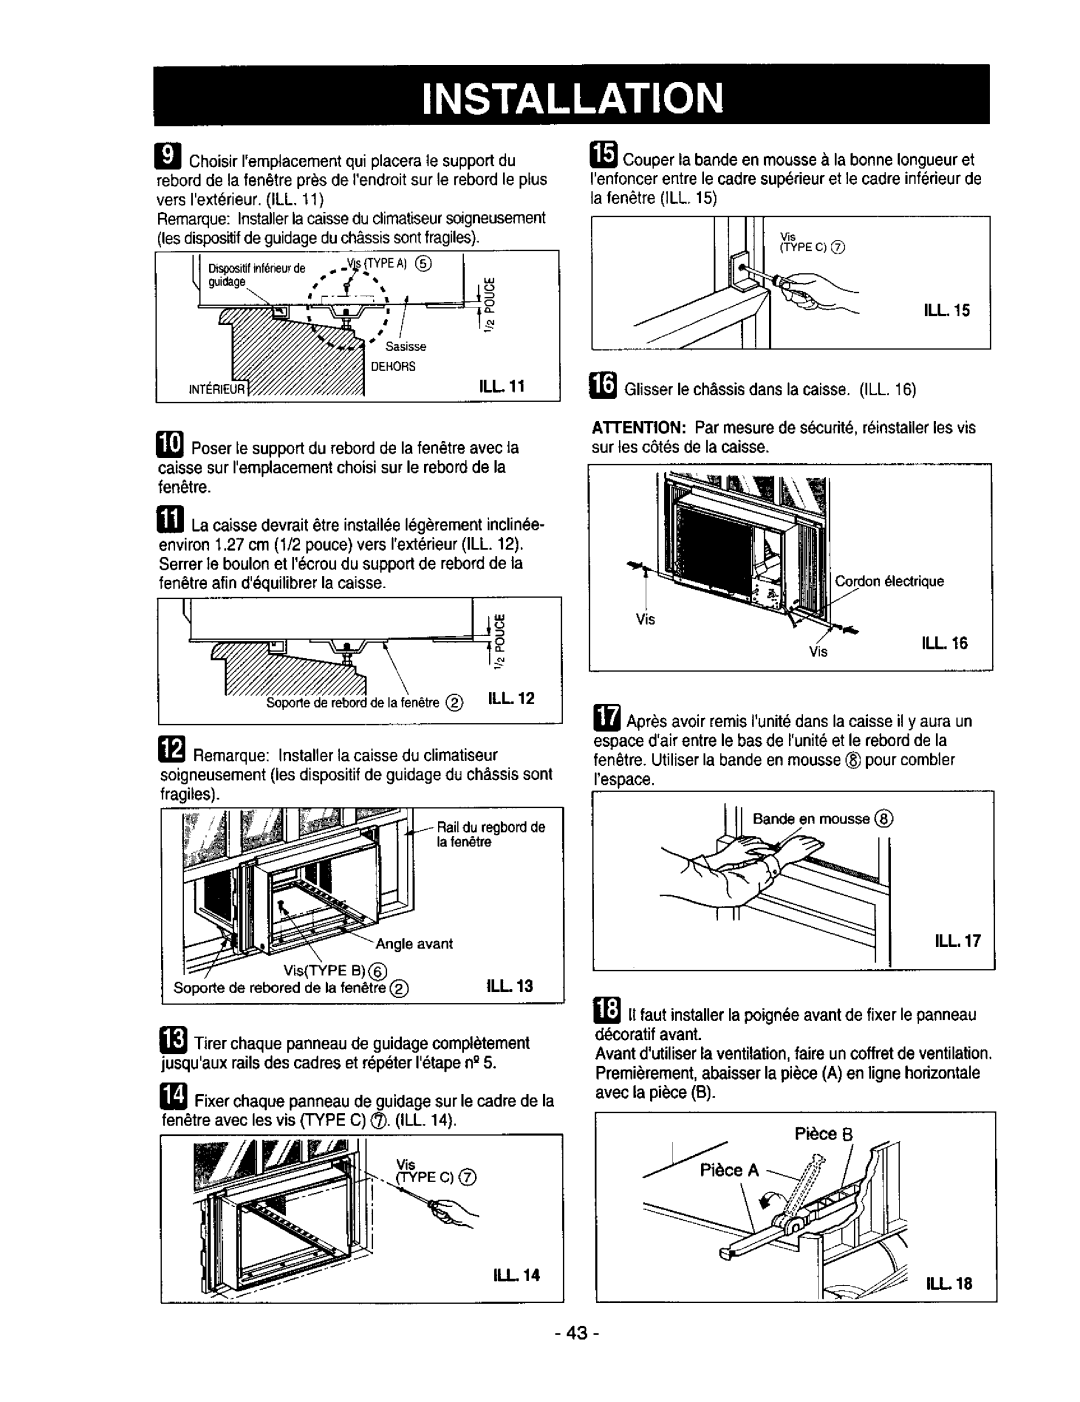 Kenmore 78122 owner manual ILL.15, Interieur, ILL.17, ILL13 